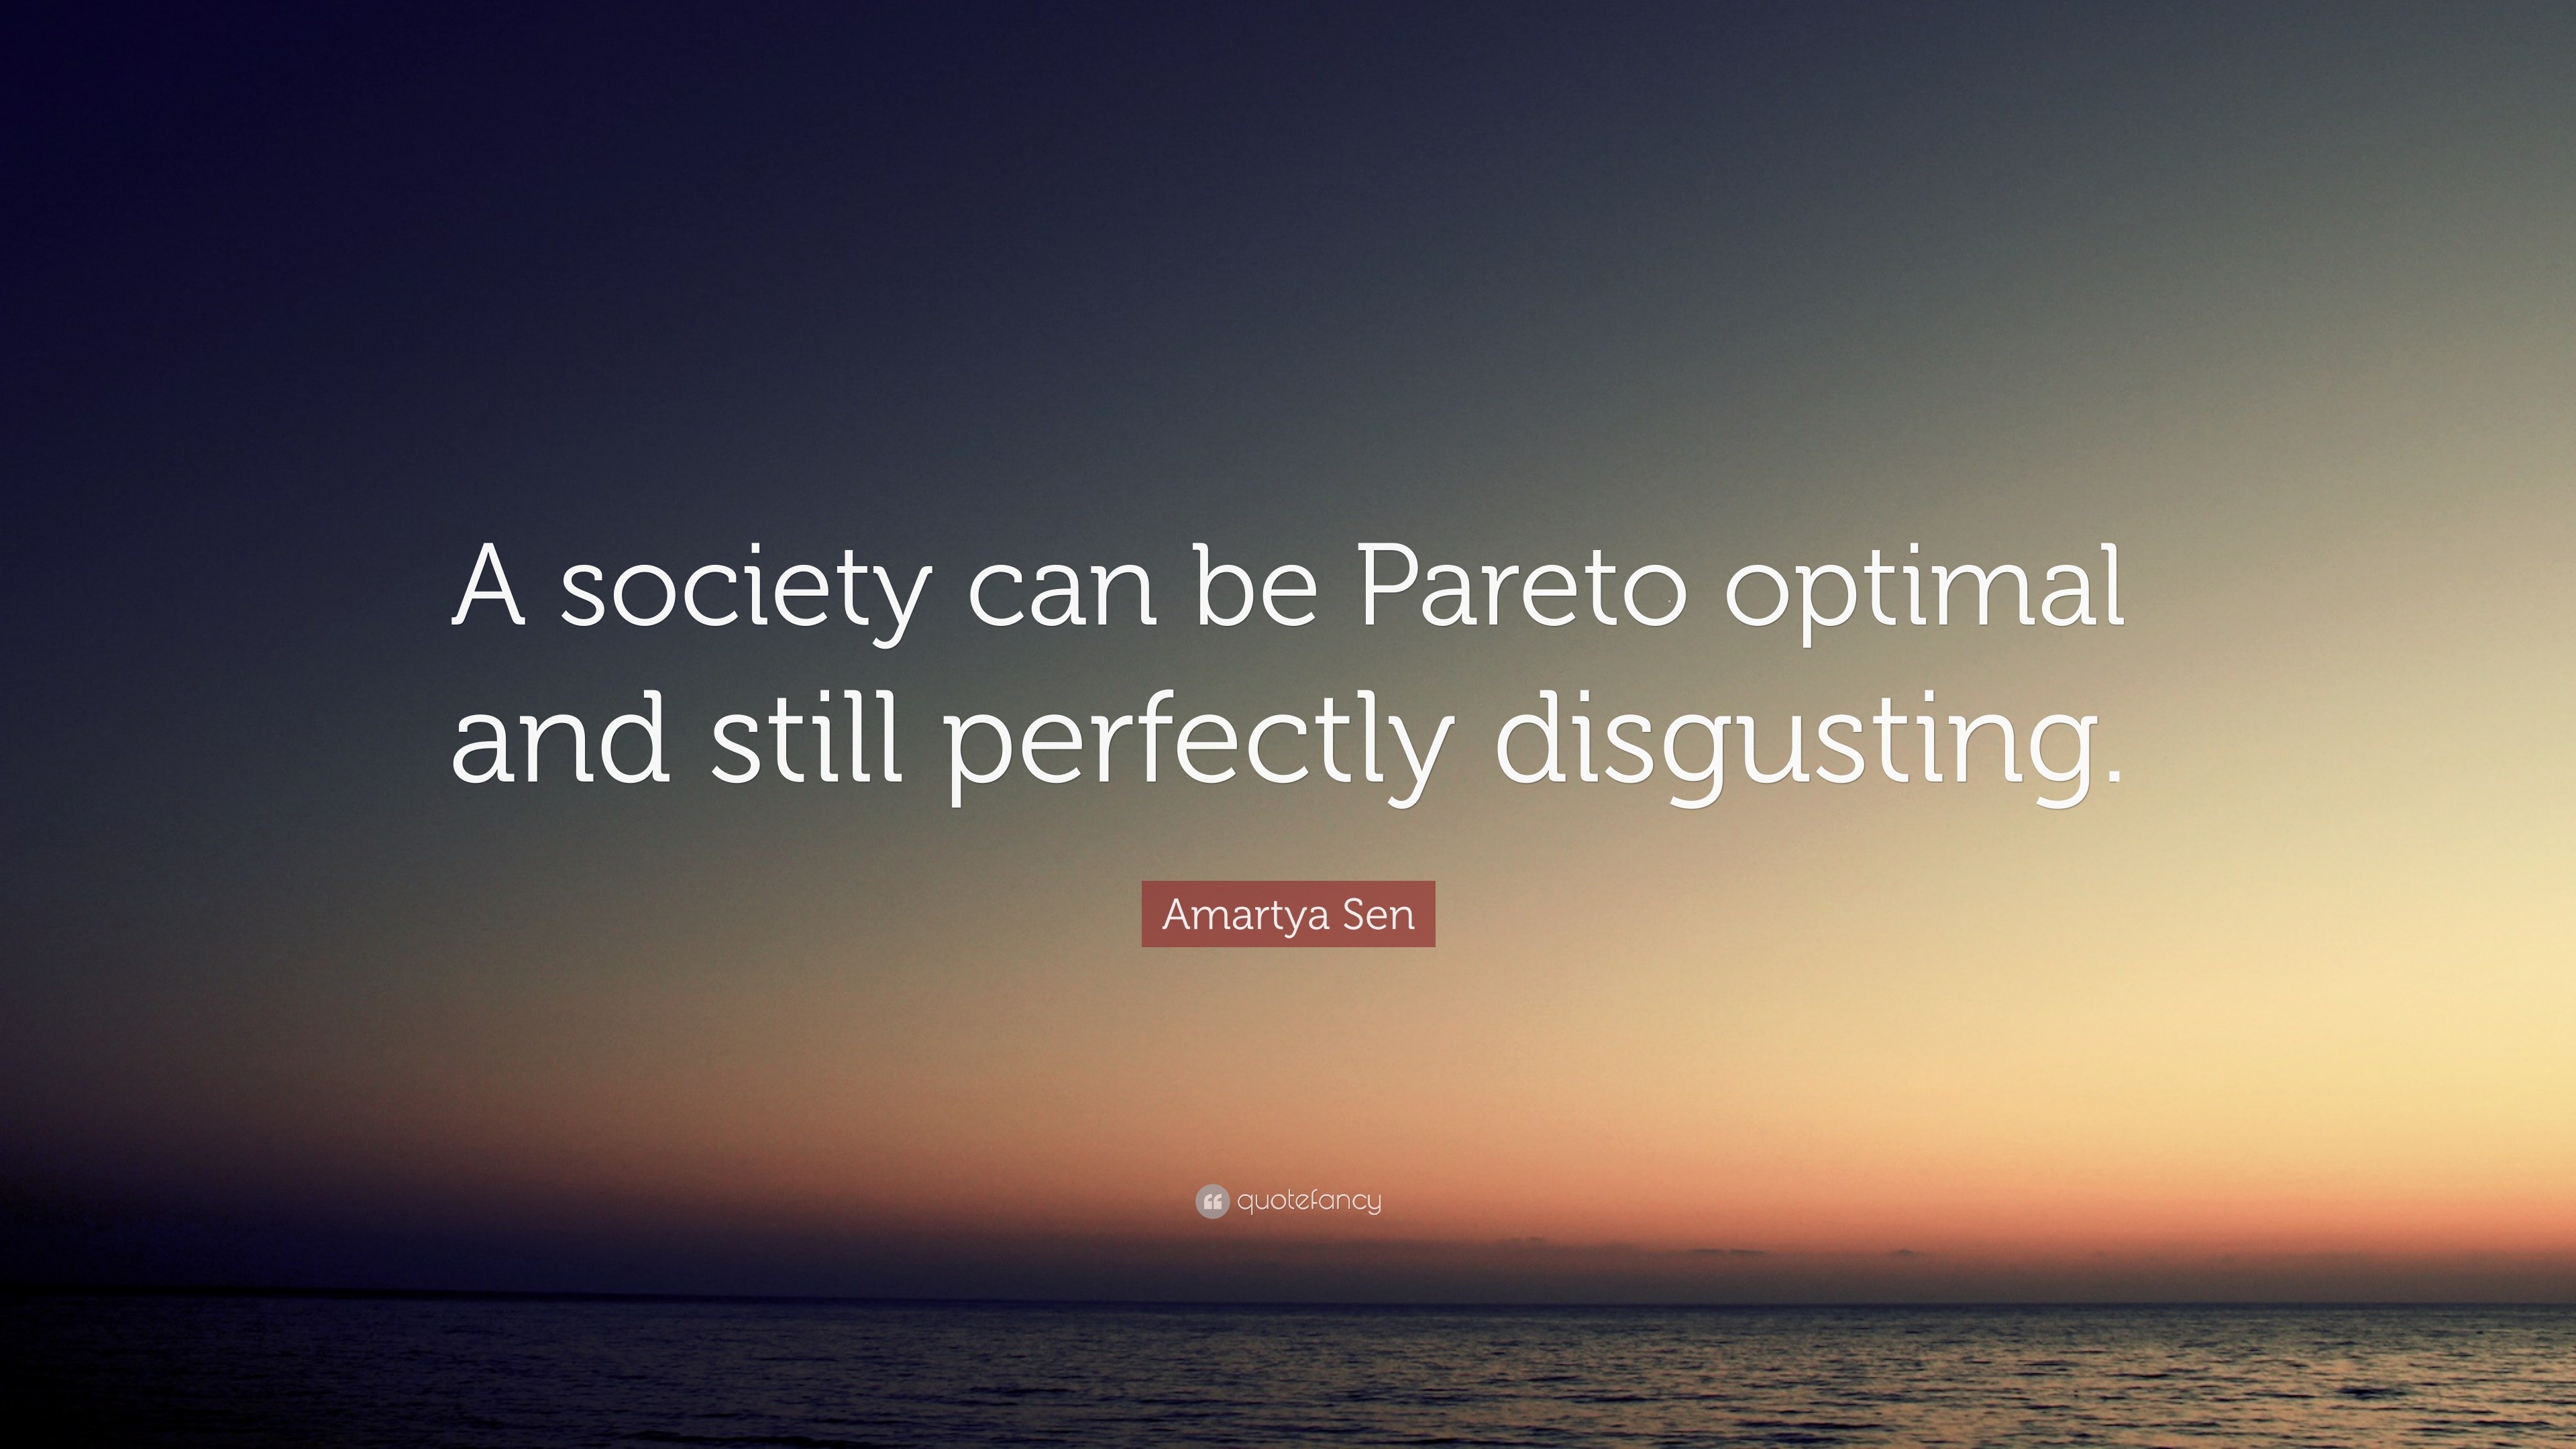 Amartya Sen Quote: "A society can be Pareto optimal and still perfectly disgusting."